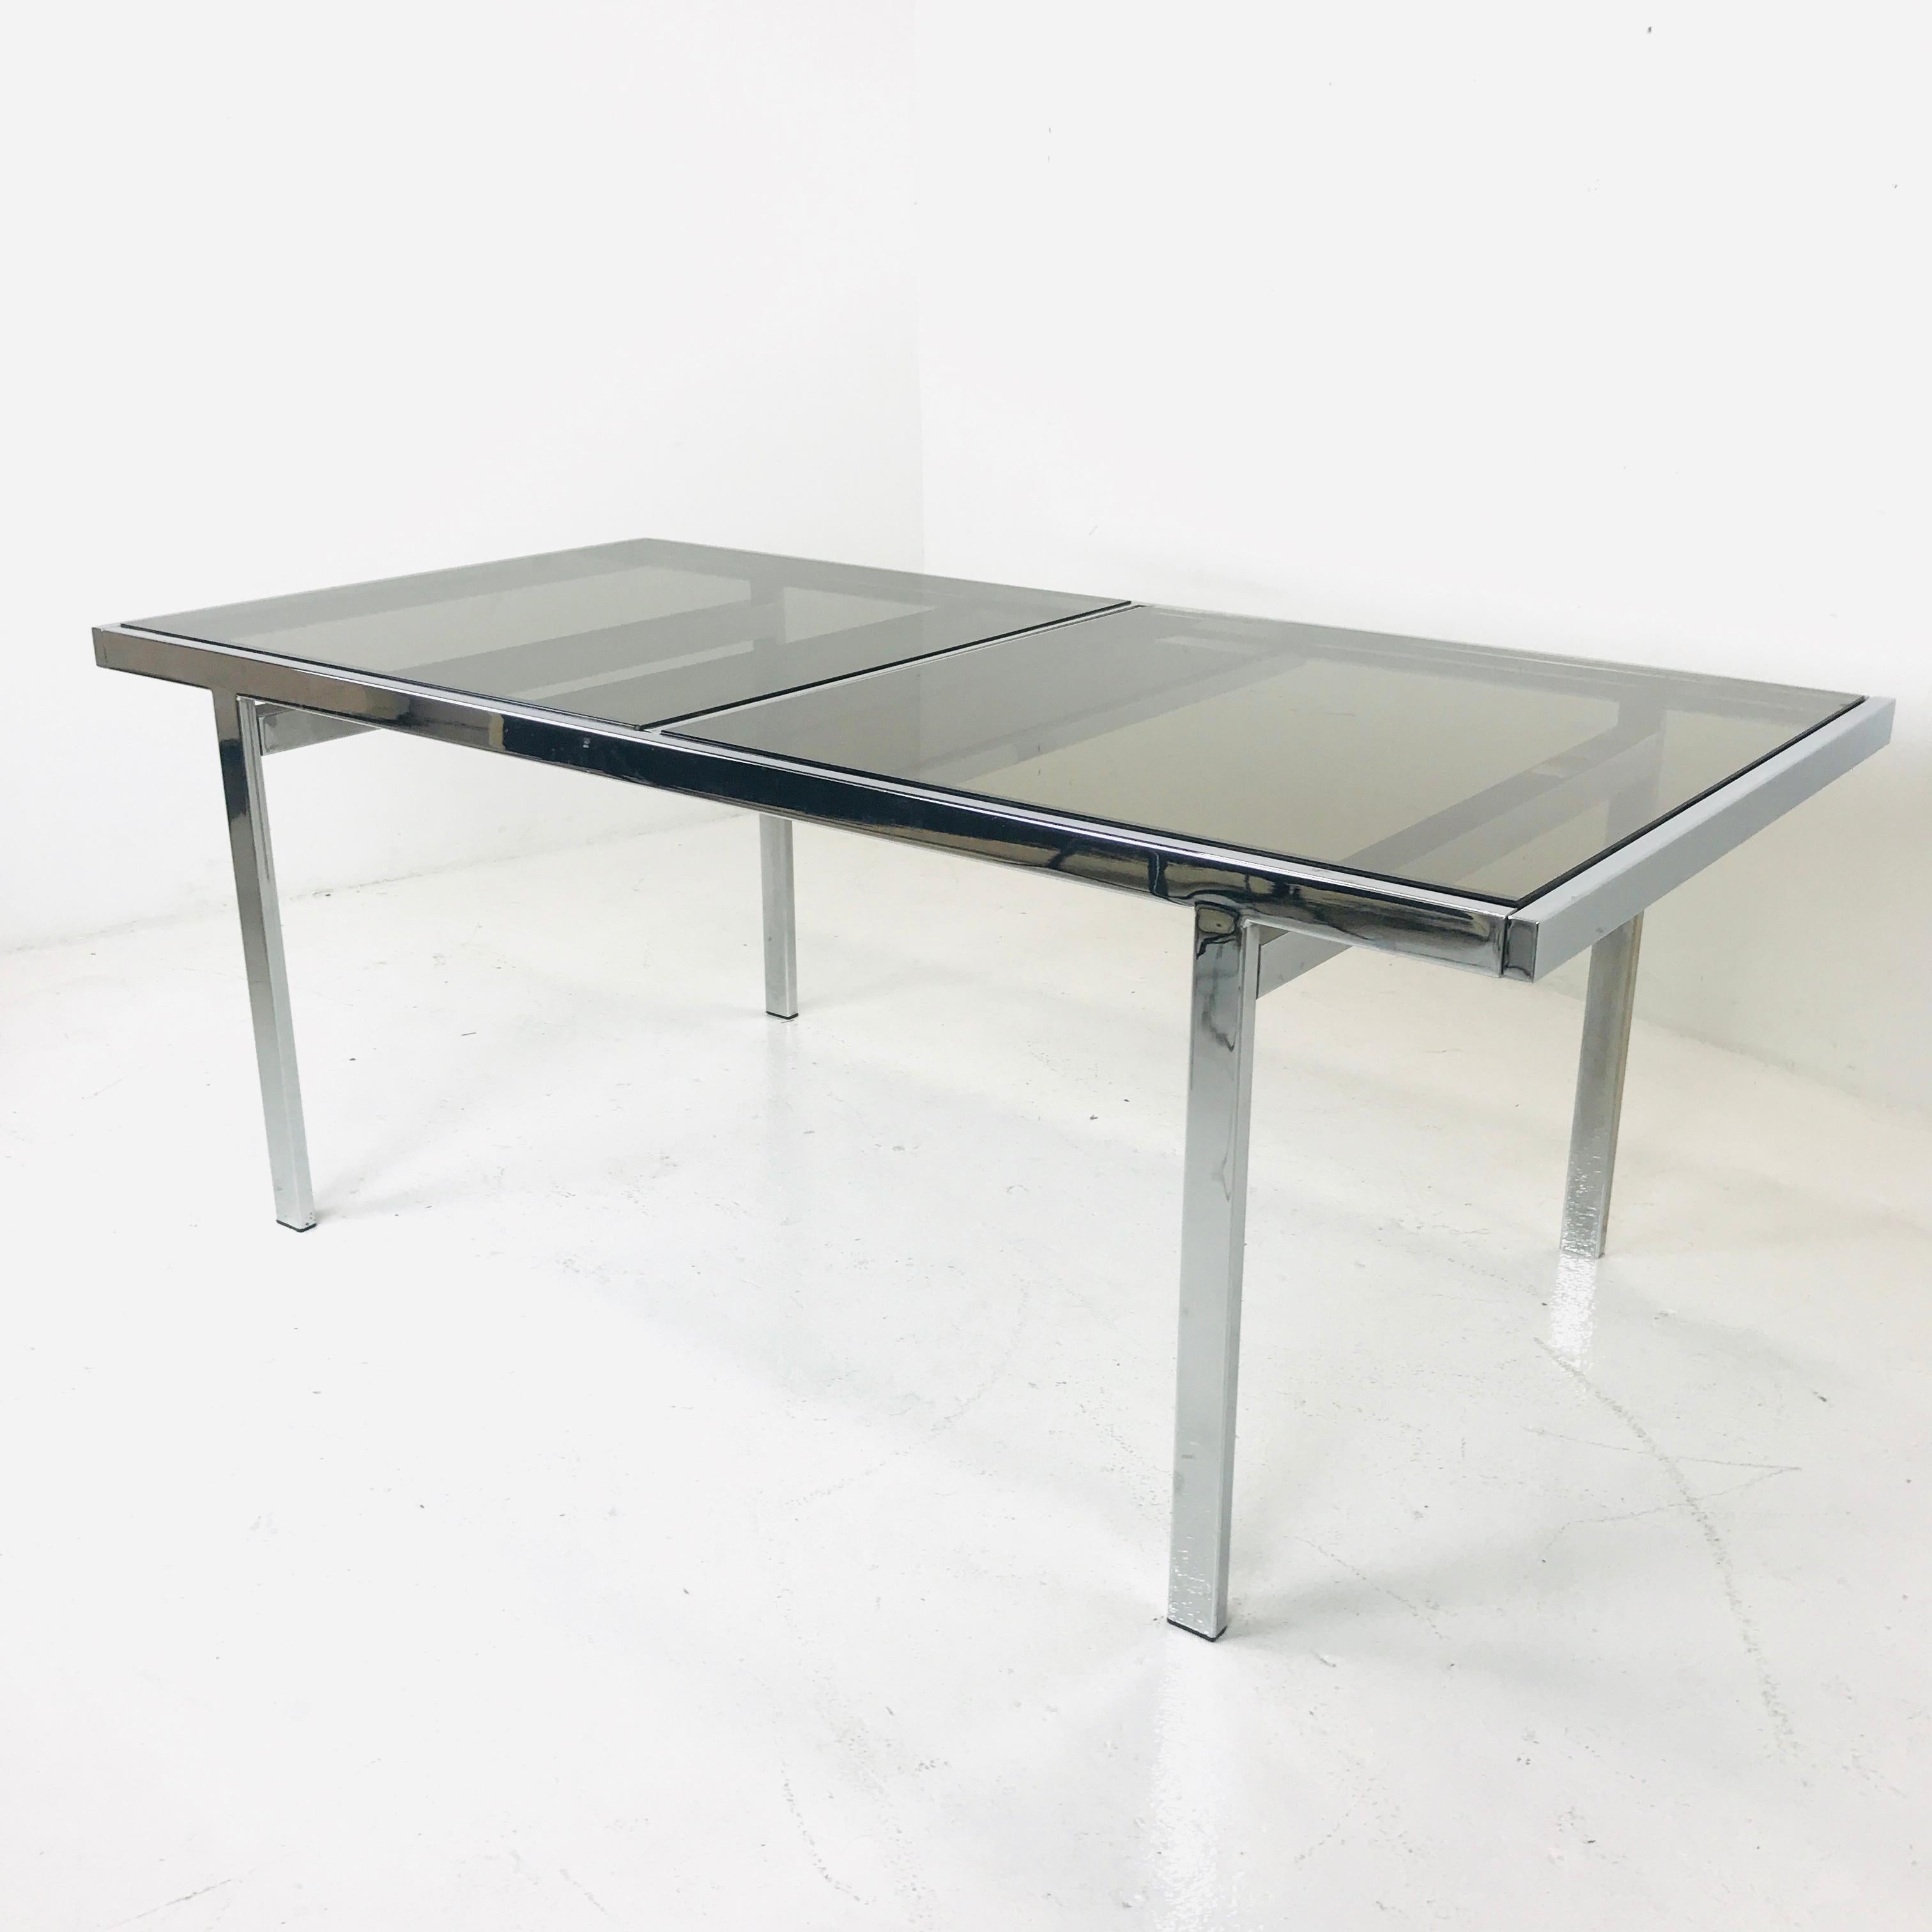 Extendable chrome dining table by Milo Baughman, made of glass and chrome with hidden leaf.
 